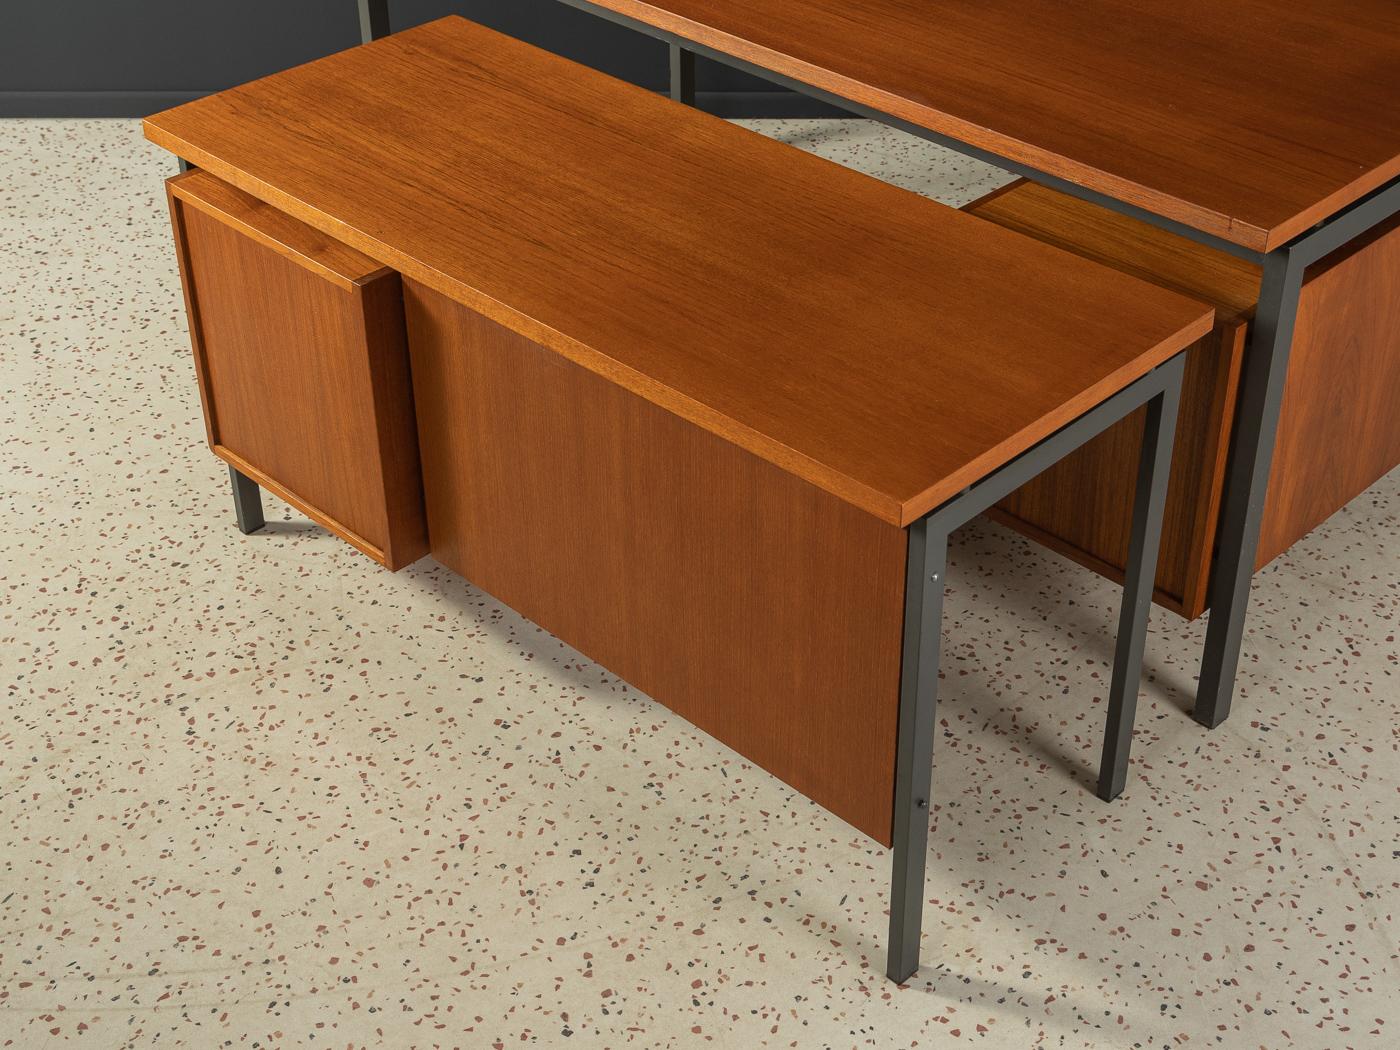 Mid-20th Century Set of Desks by Herbert Hirche for Holzäpfel 1950s For Sale